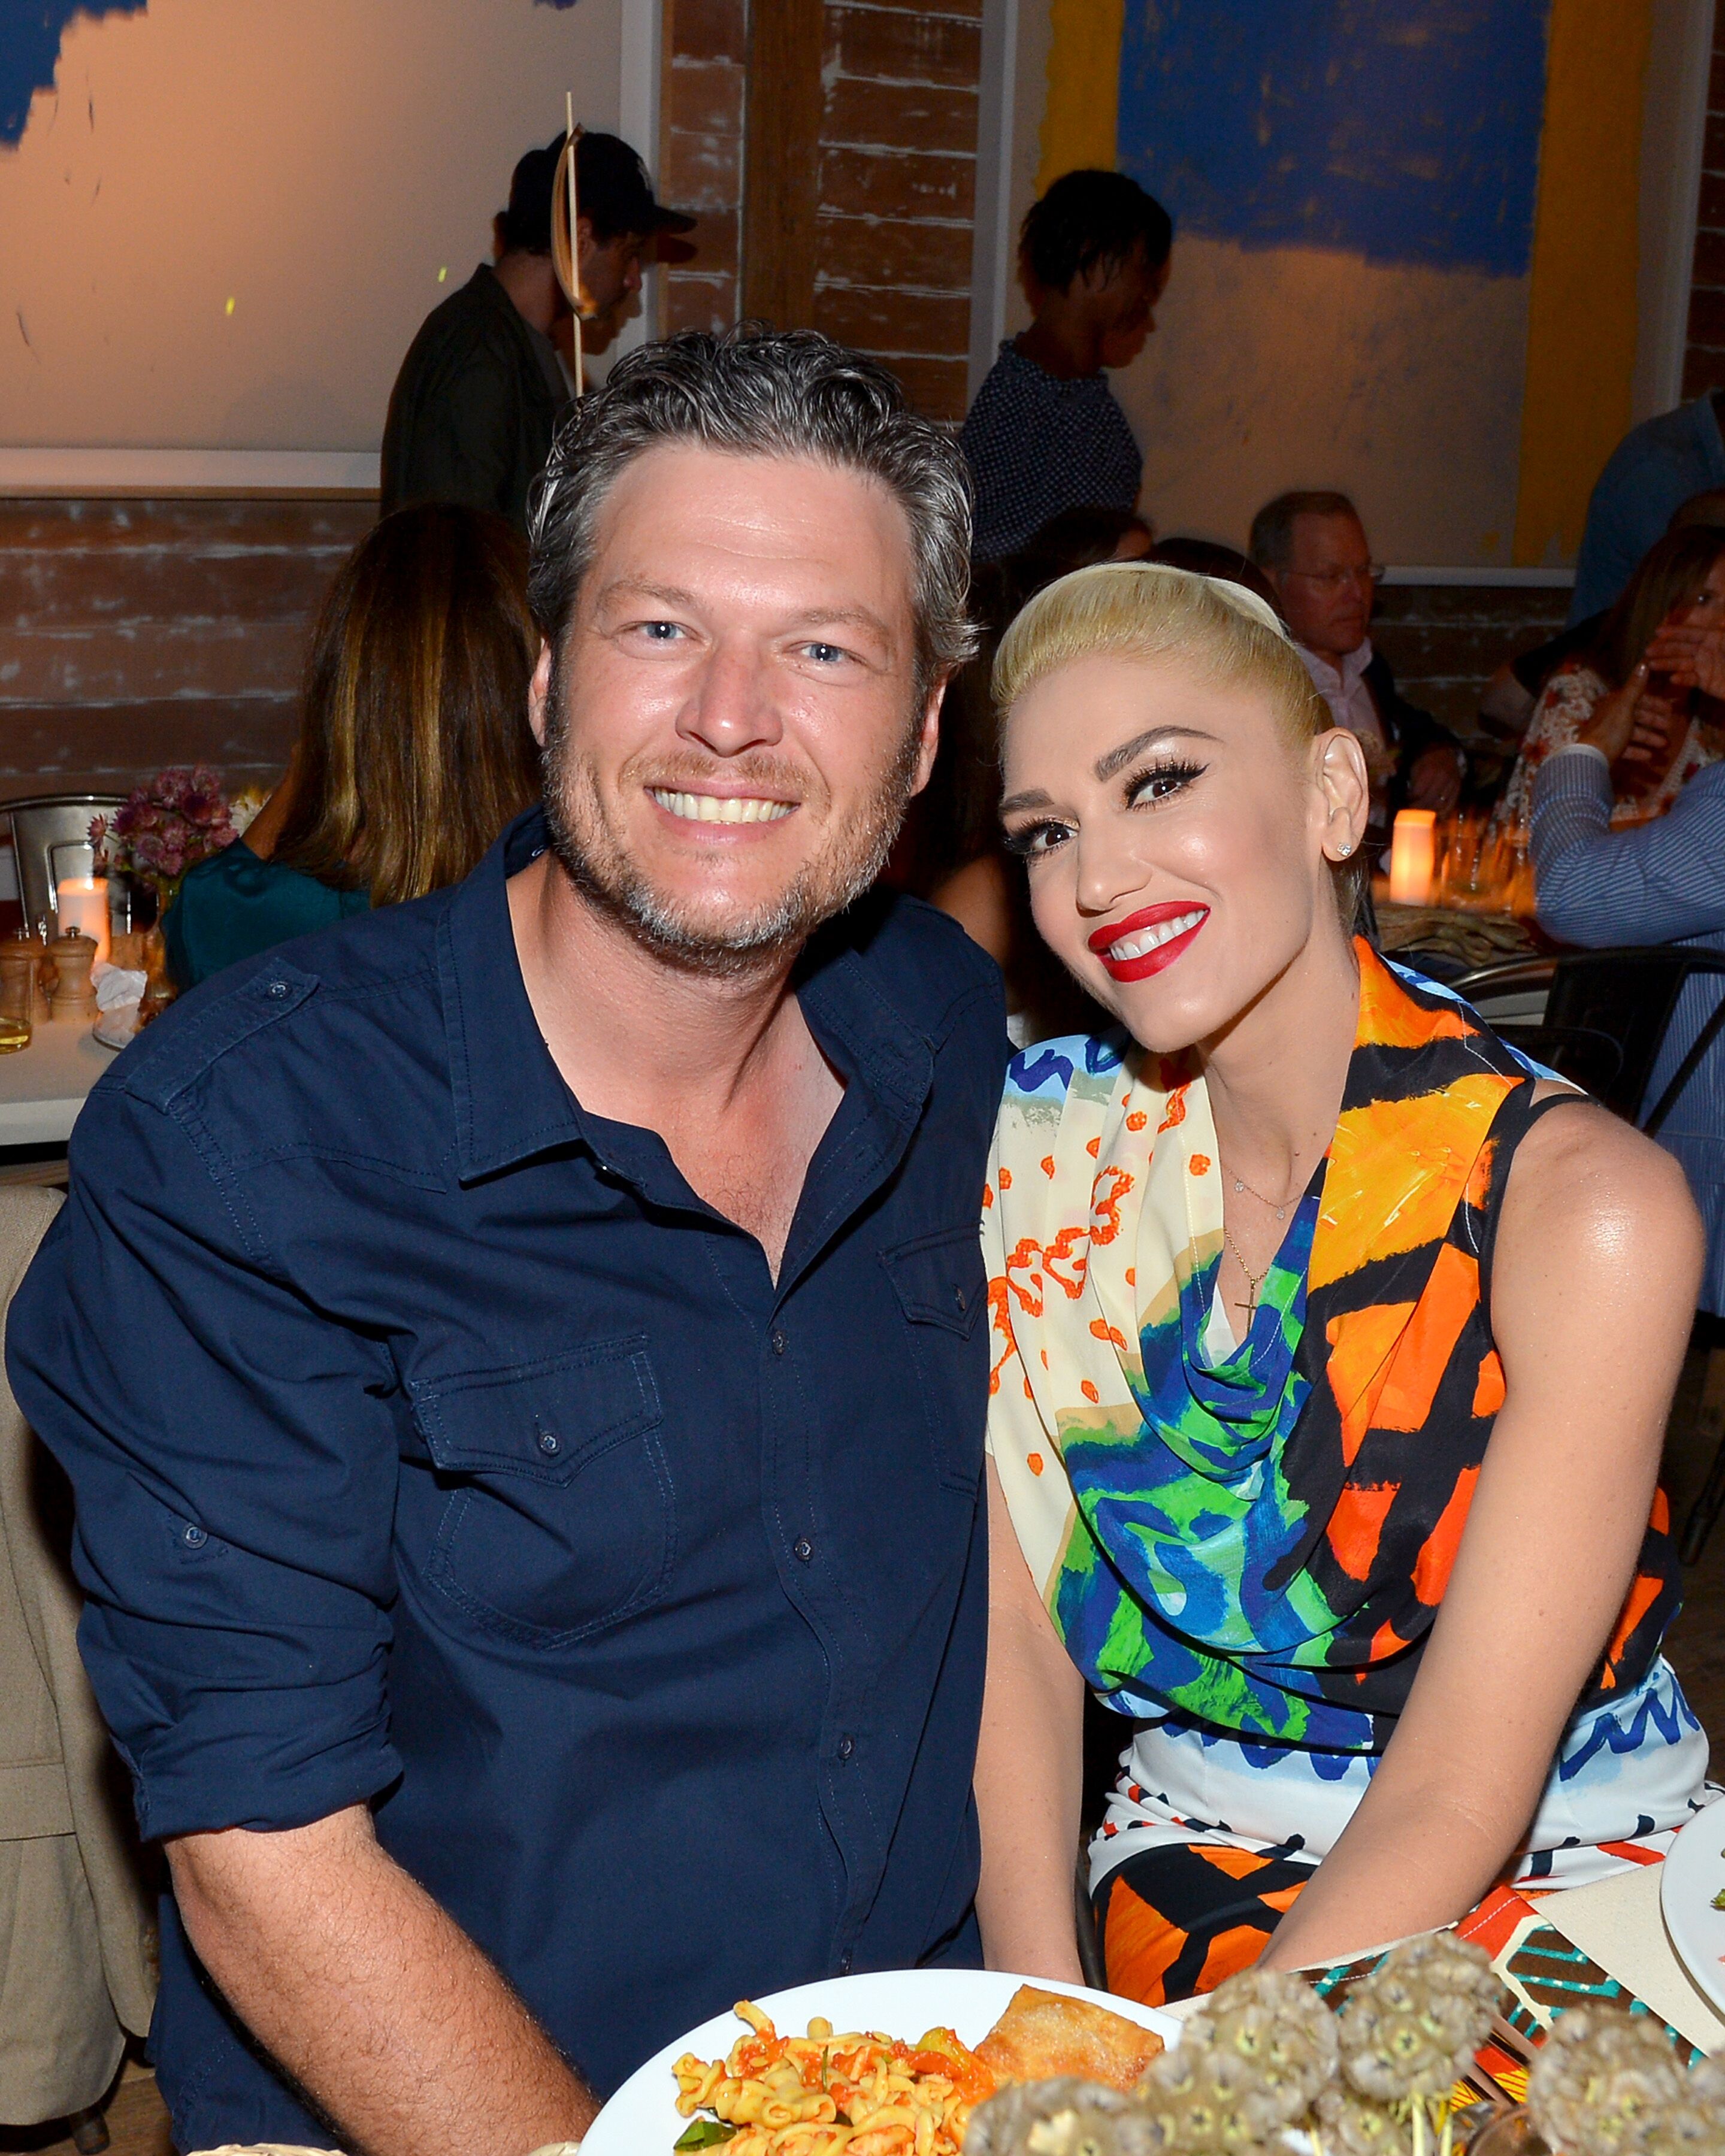 Blake Shelton and Gwen Stefani at the Apollo in the Hamptons party on August 20, 2016 | Photo: Getty Images